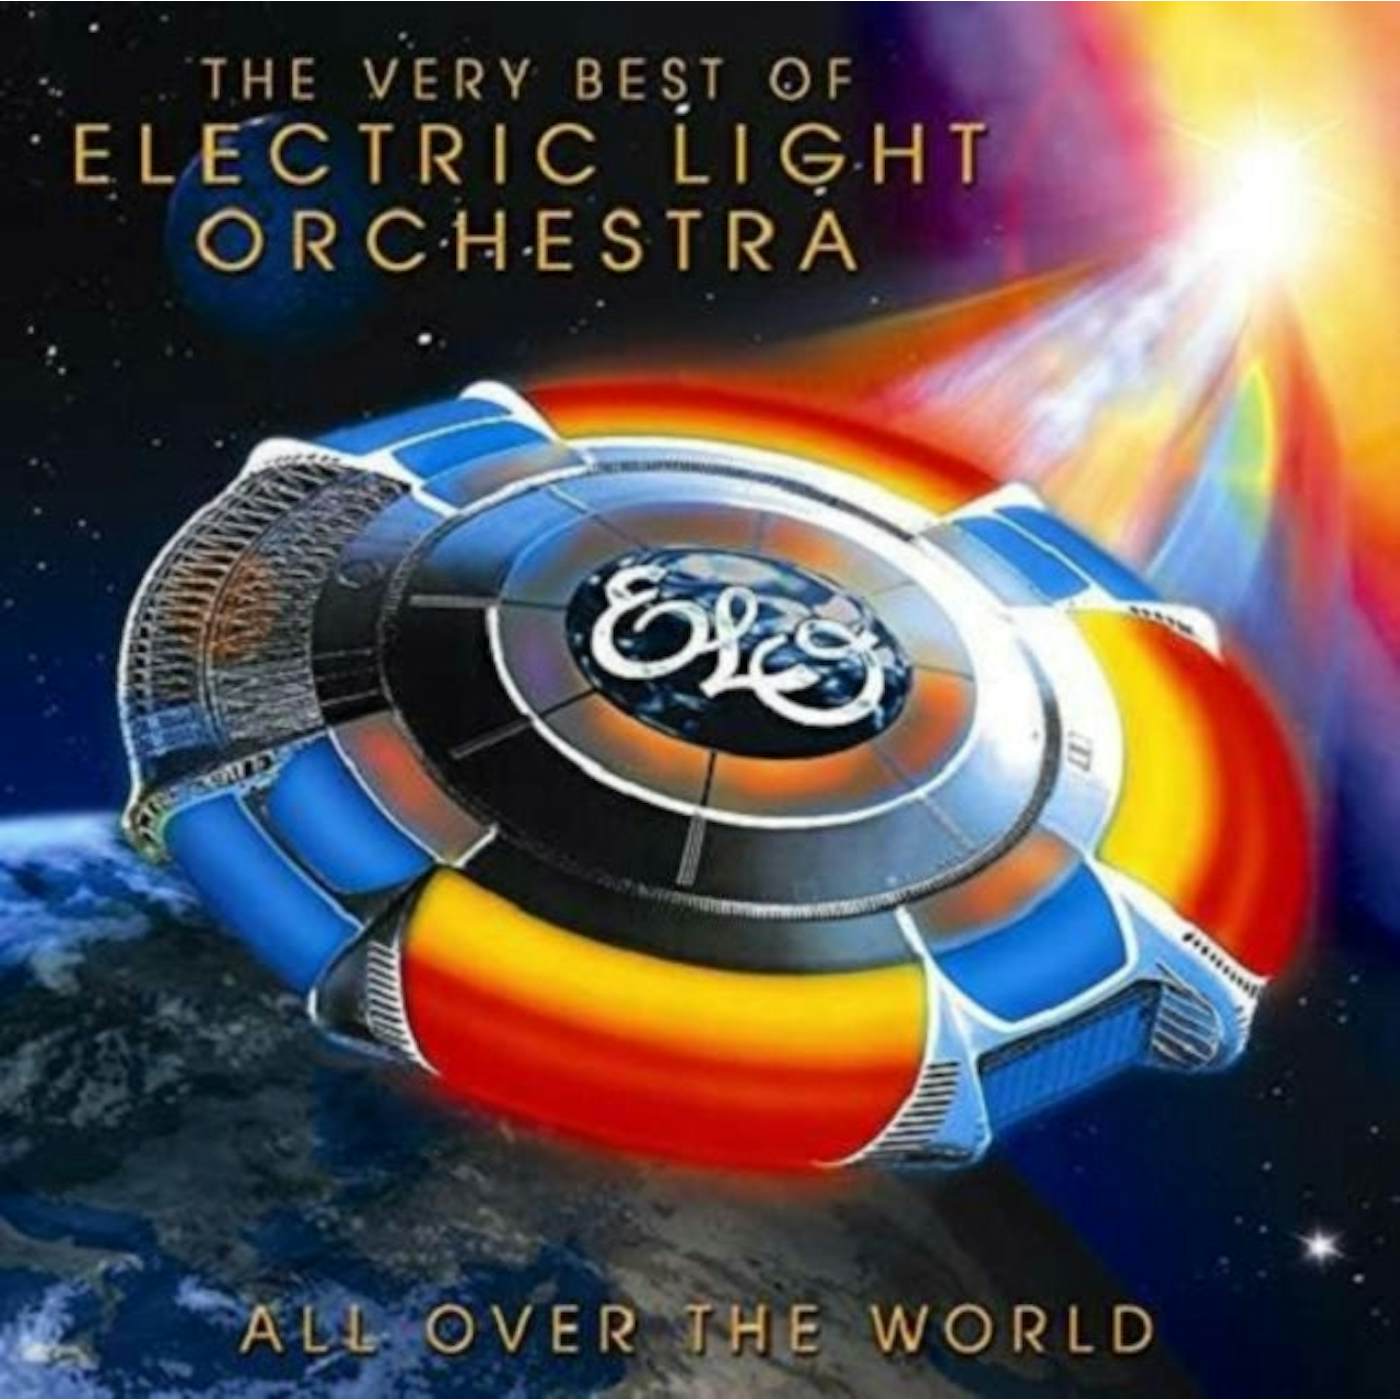 ELO (Electric Light Orchestra) LP Vinyl Record - All Over The World - The Very Best Of